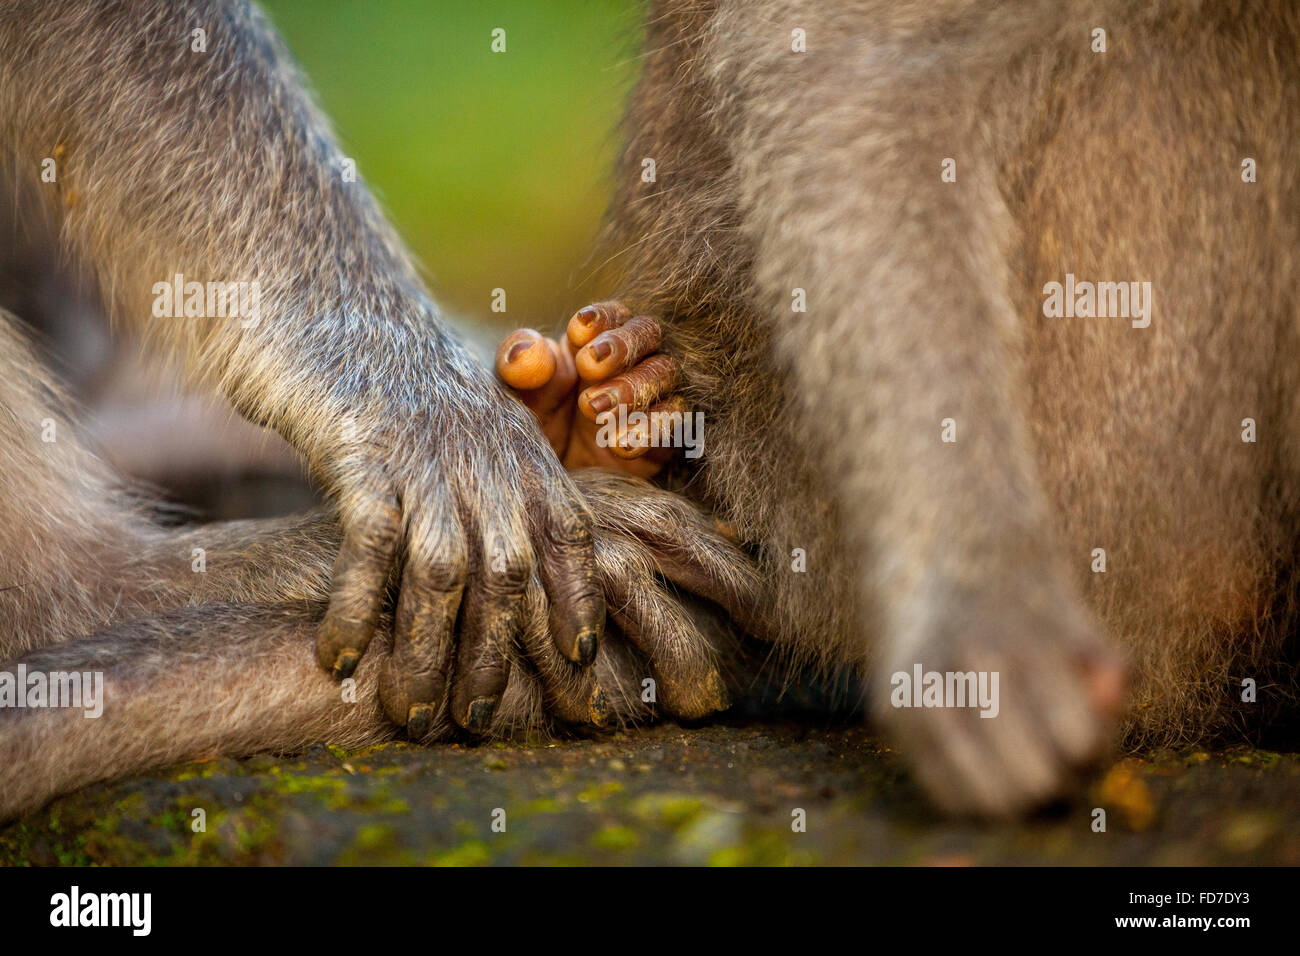 Long-tailed macaque (Macaca fascicularis) monkeys family with babies, baby monkey, stone wall, Ubud Monkey Forest,  Monkey hands Stock Photo